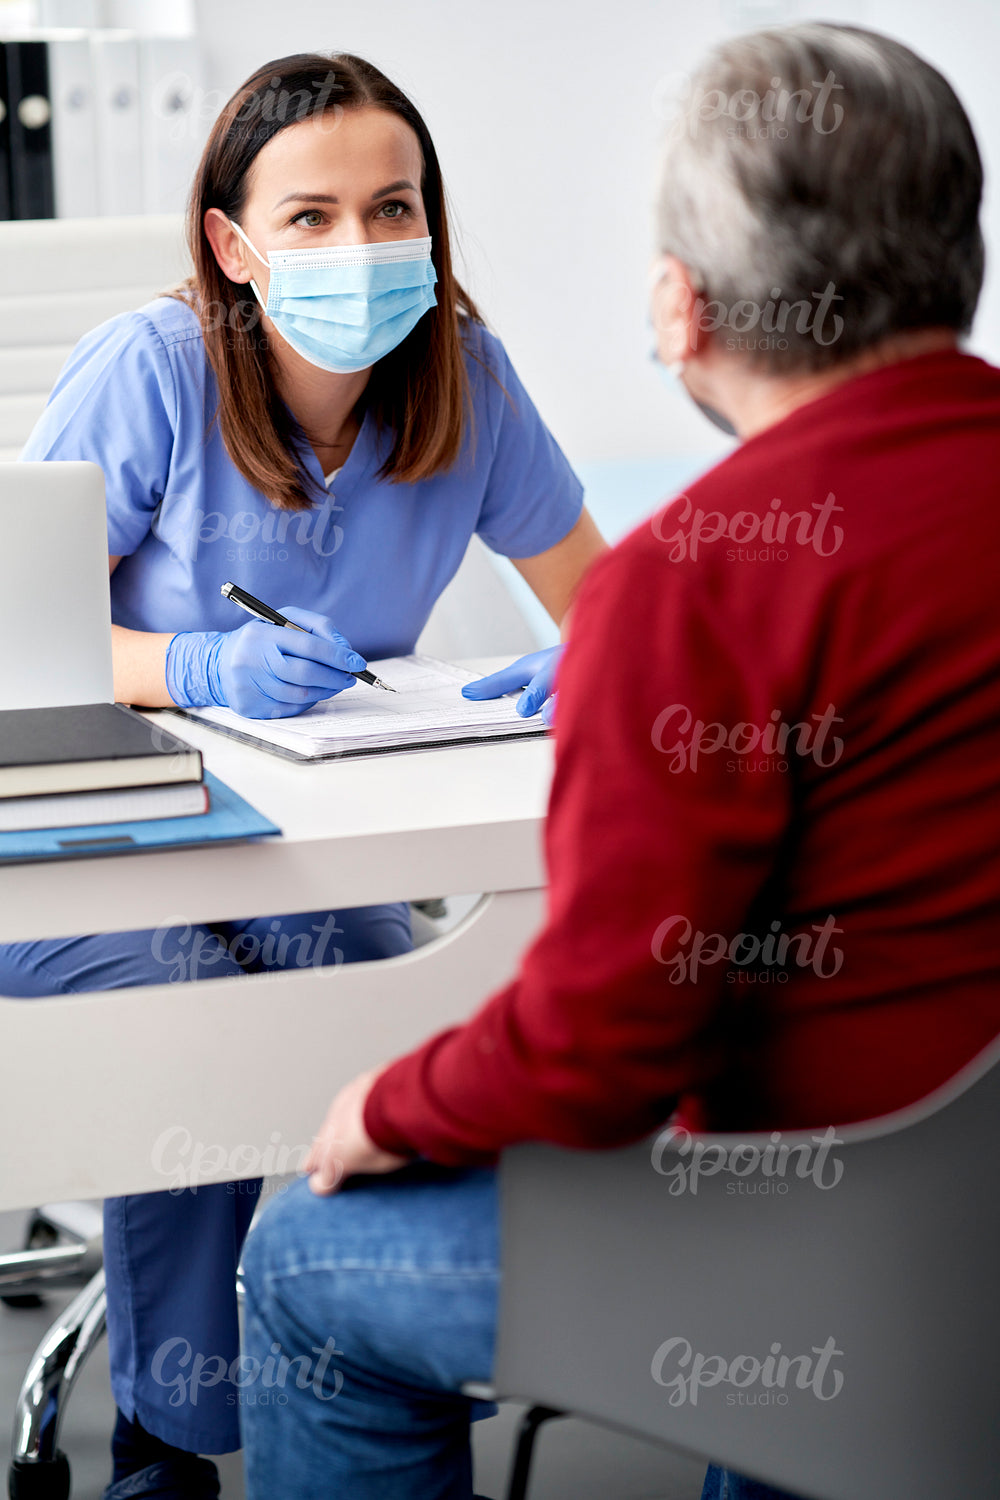 Female doctor conducts a medical interview with the senior patient